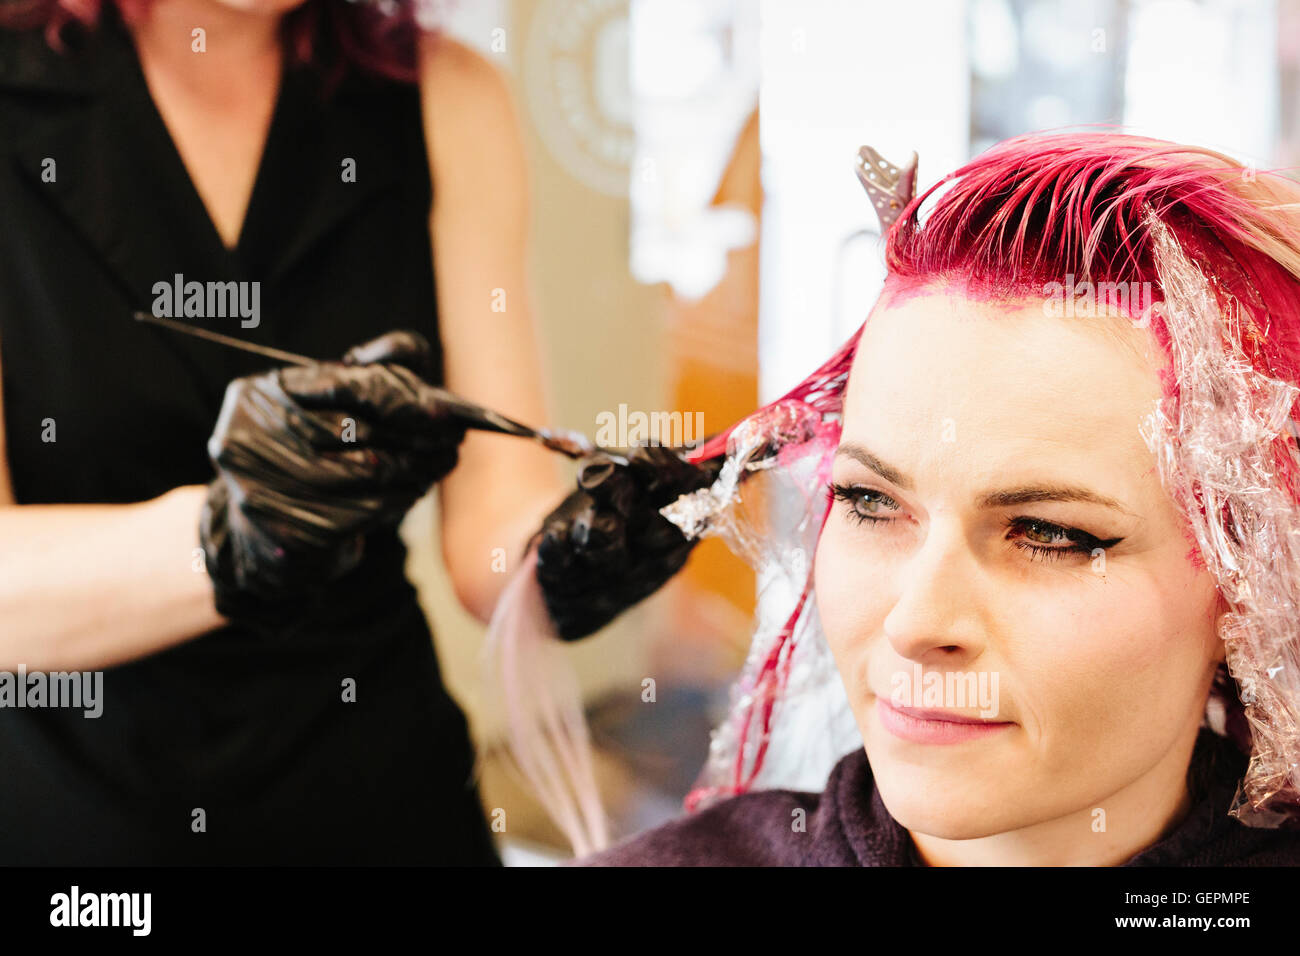 Hair stylist dying hair of woman with pink dye 20569925 Stock Photo at  Vecteezy